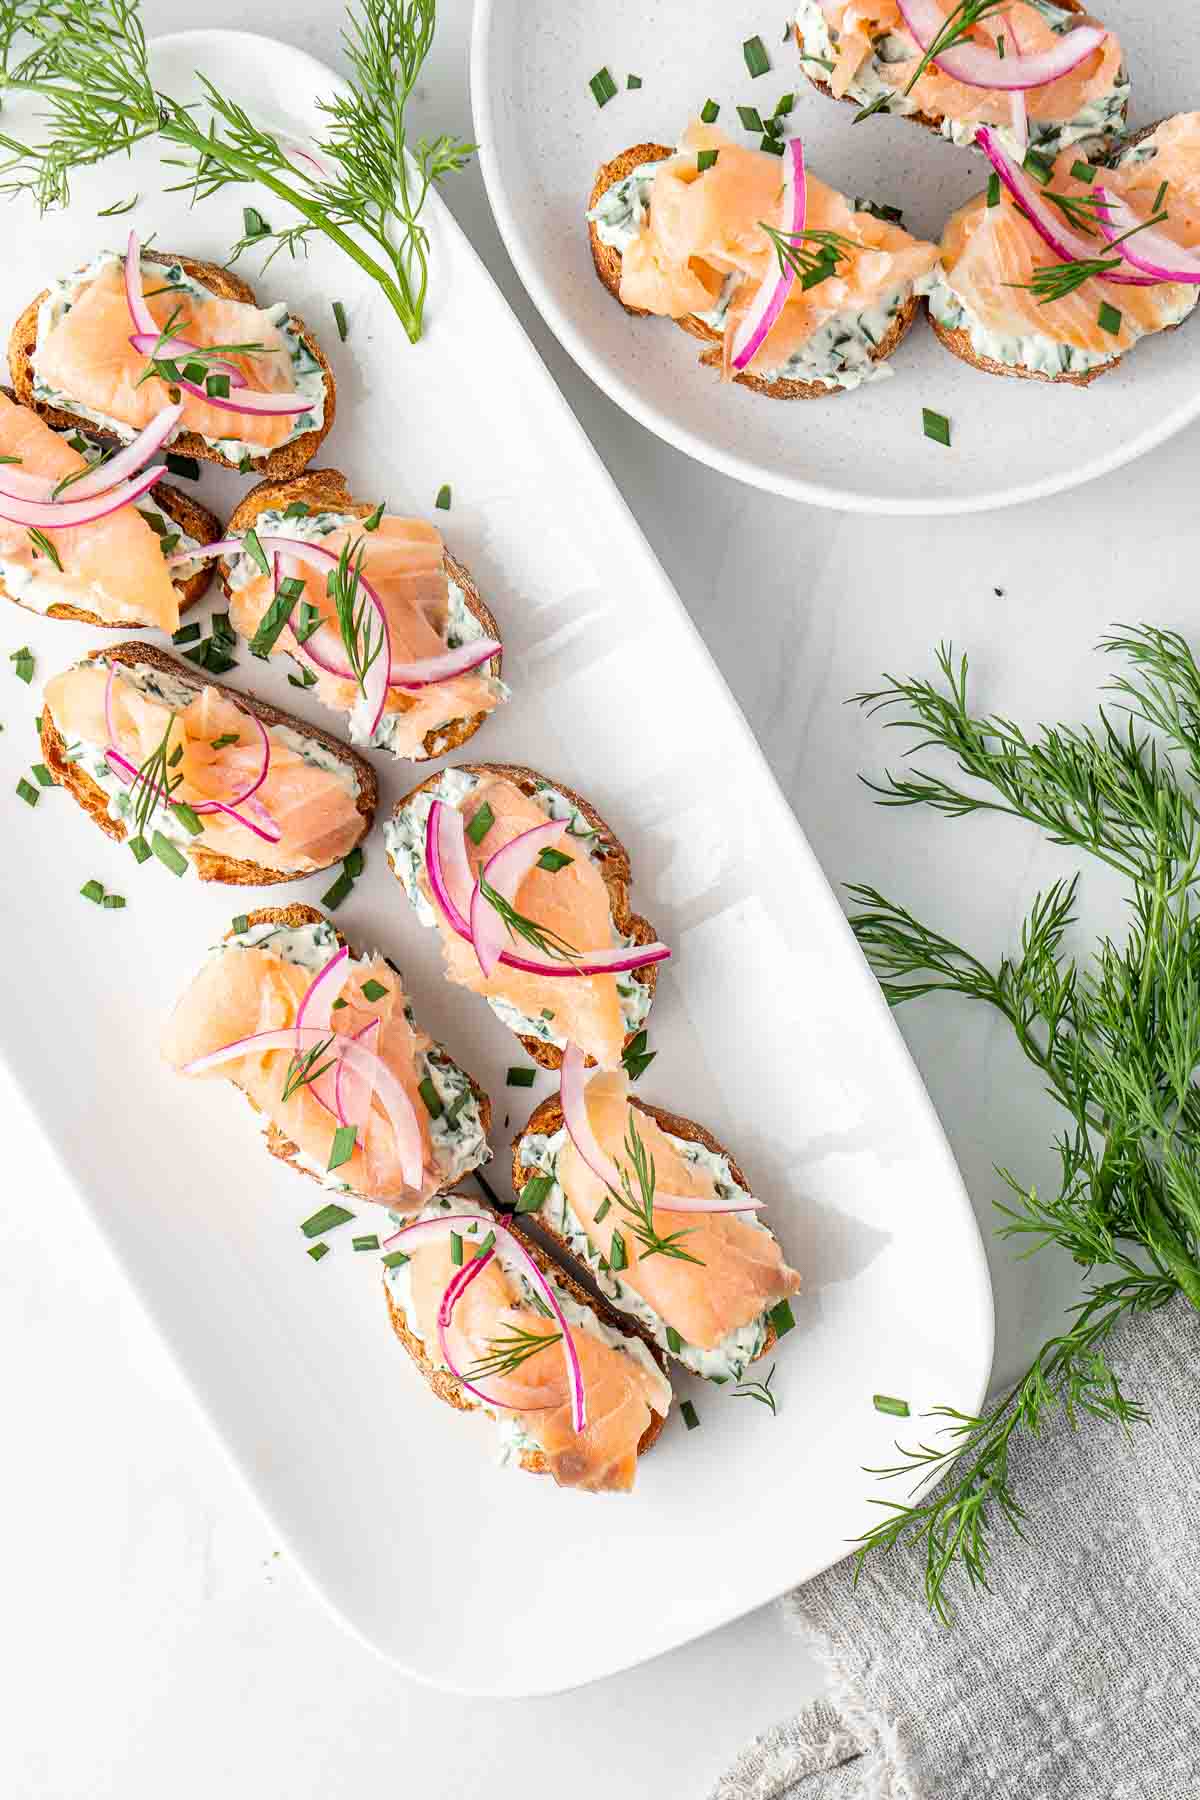 Smoked salmon crostini served on a long white platter from above.